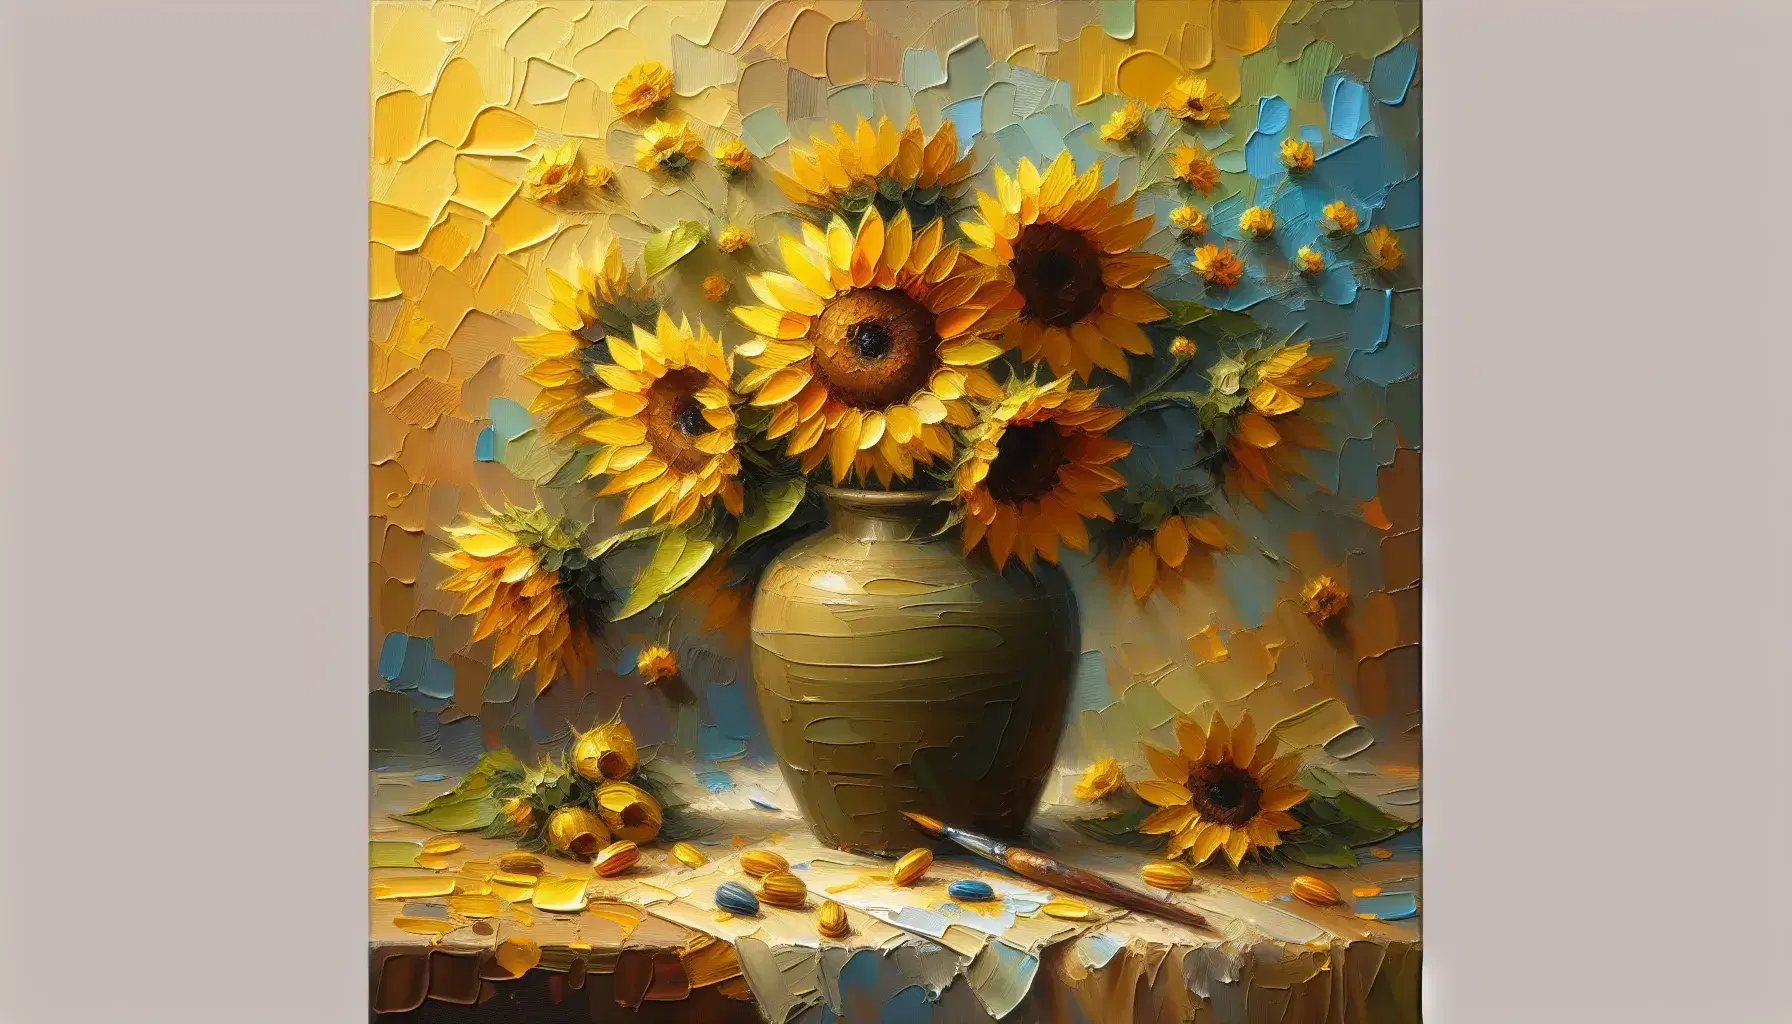 Close-up painting of sunflowers in an olive green terracotta vase, with yellow petals and seed centers, on an impasto background of blue, yellow and green.